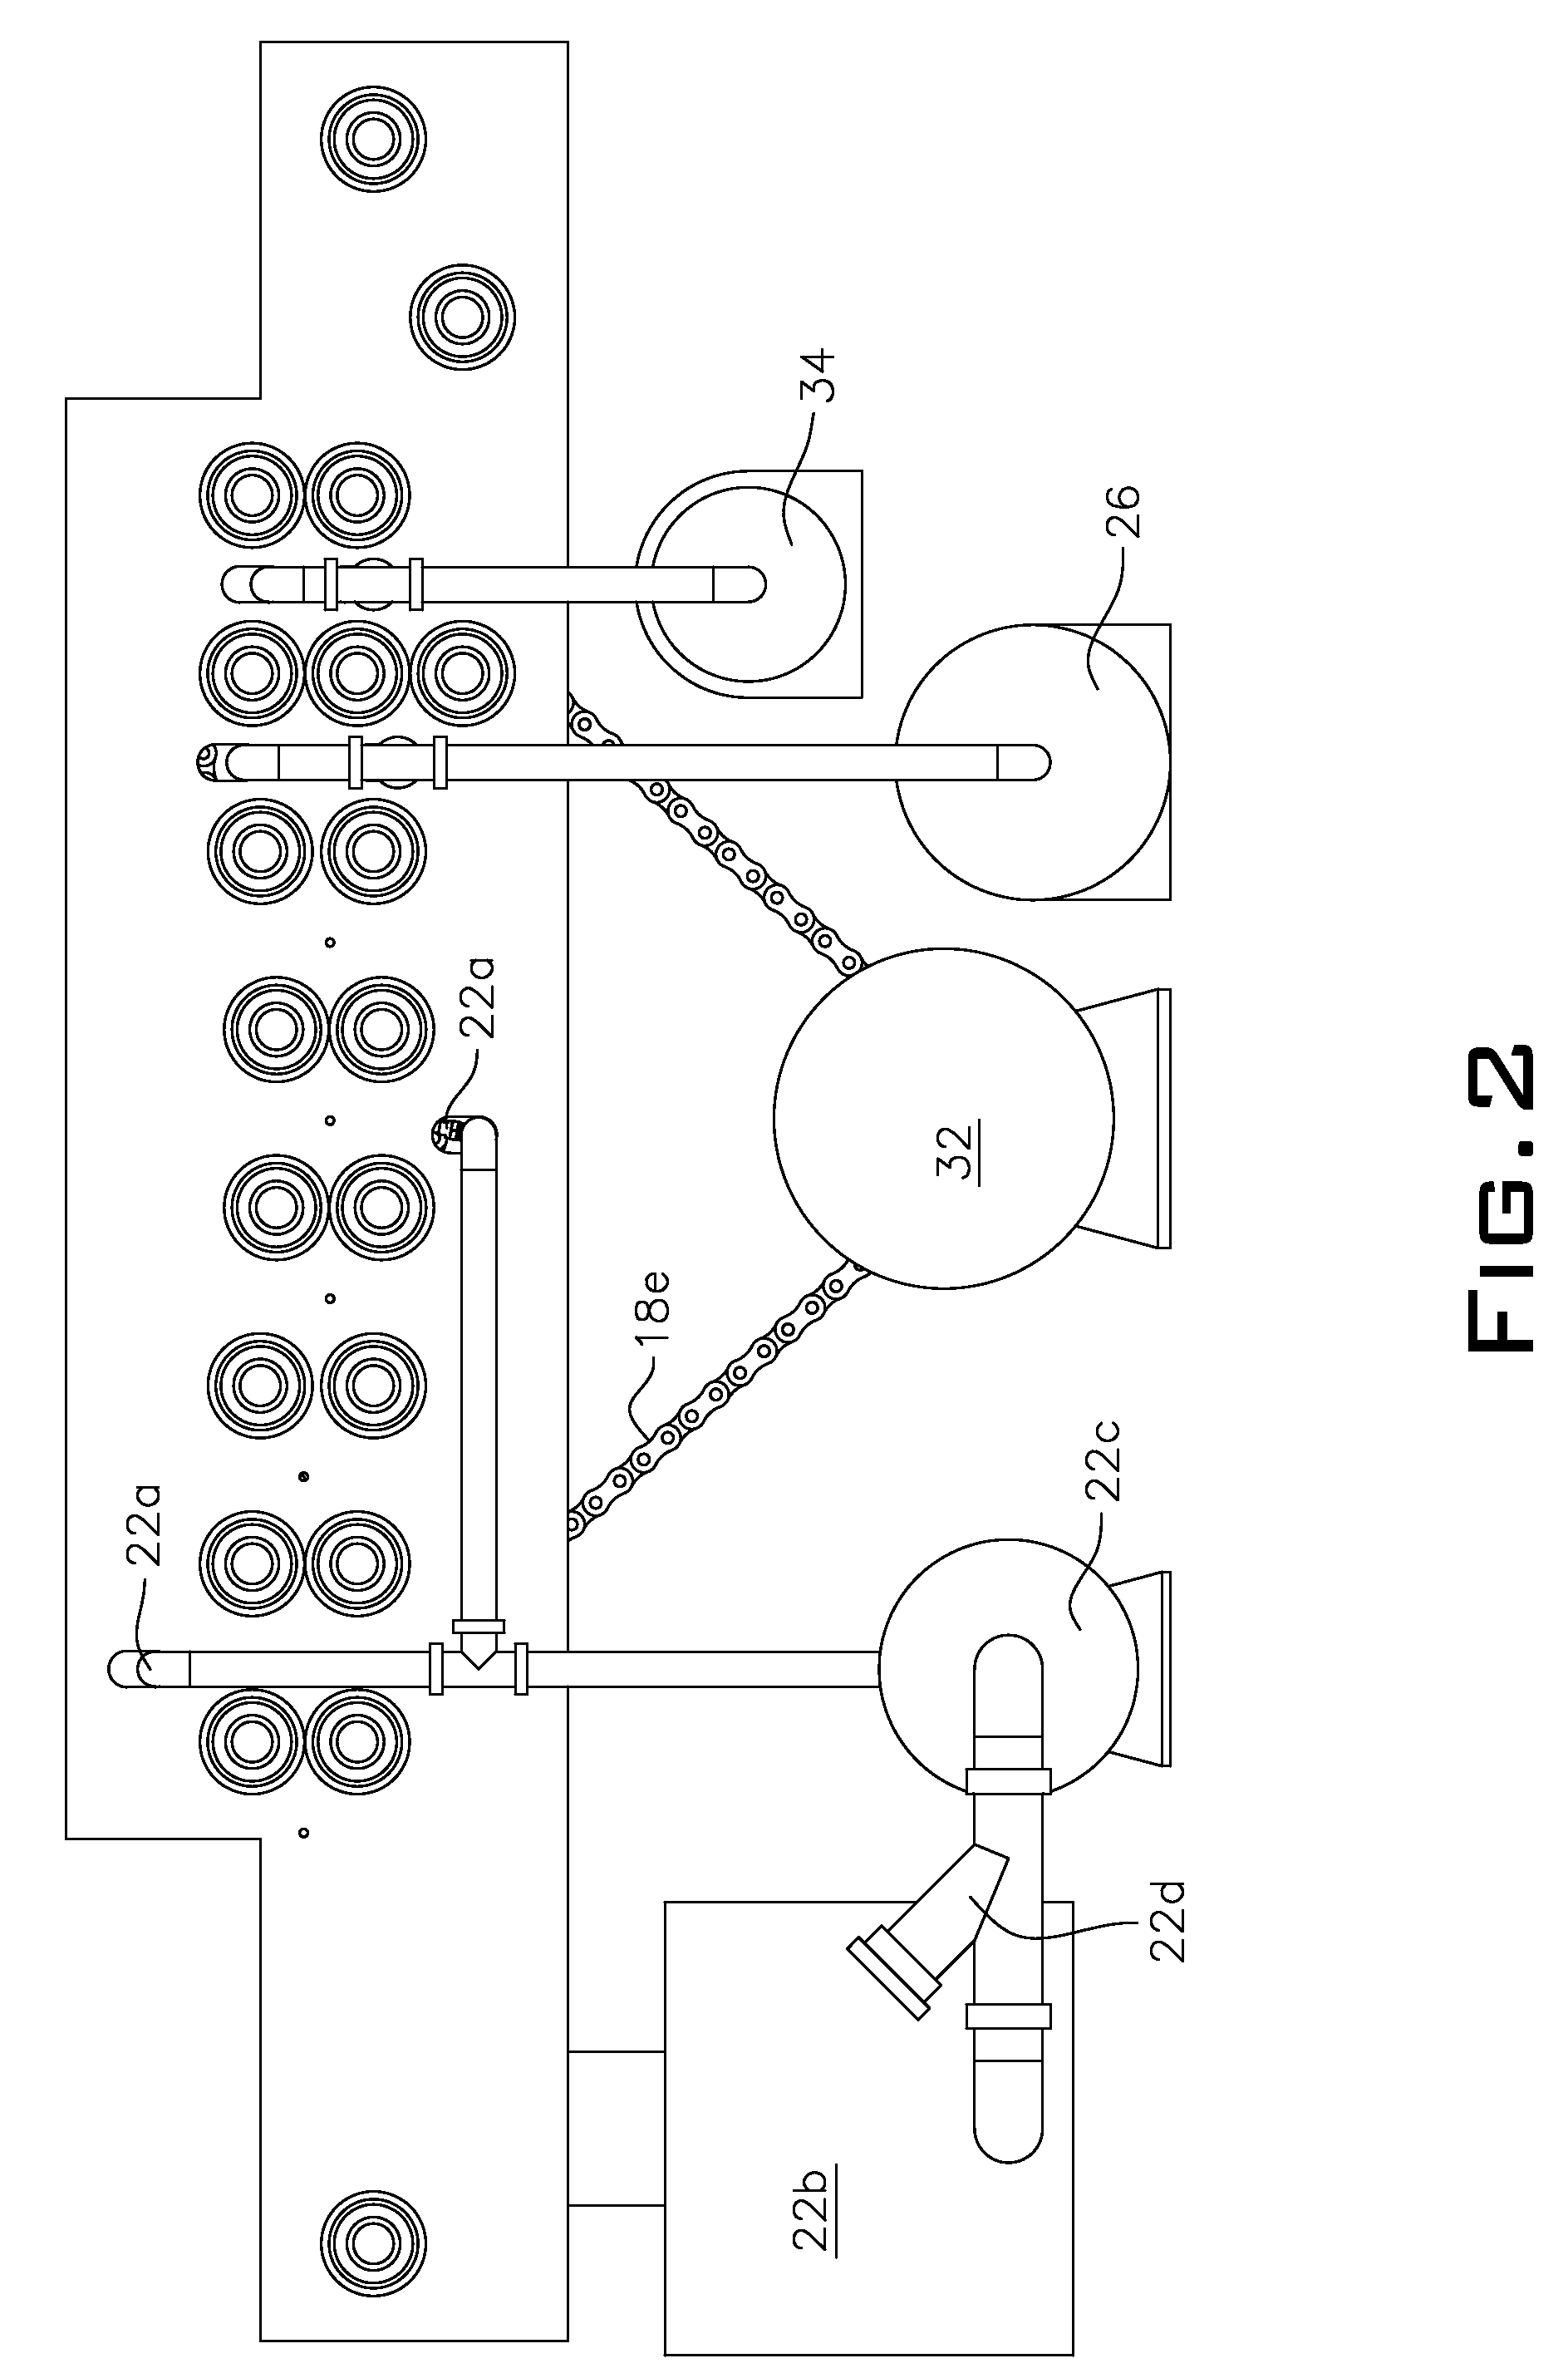 Paper currency cleansing/reconditioning/sanitizing system and method